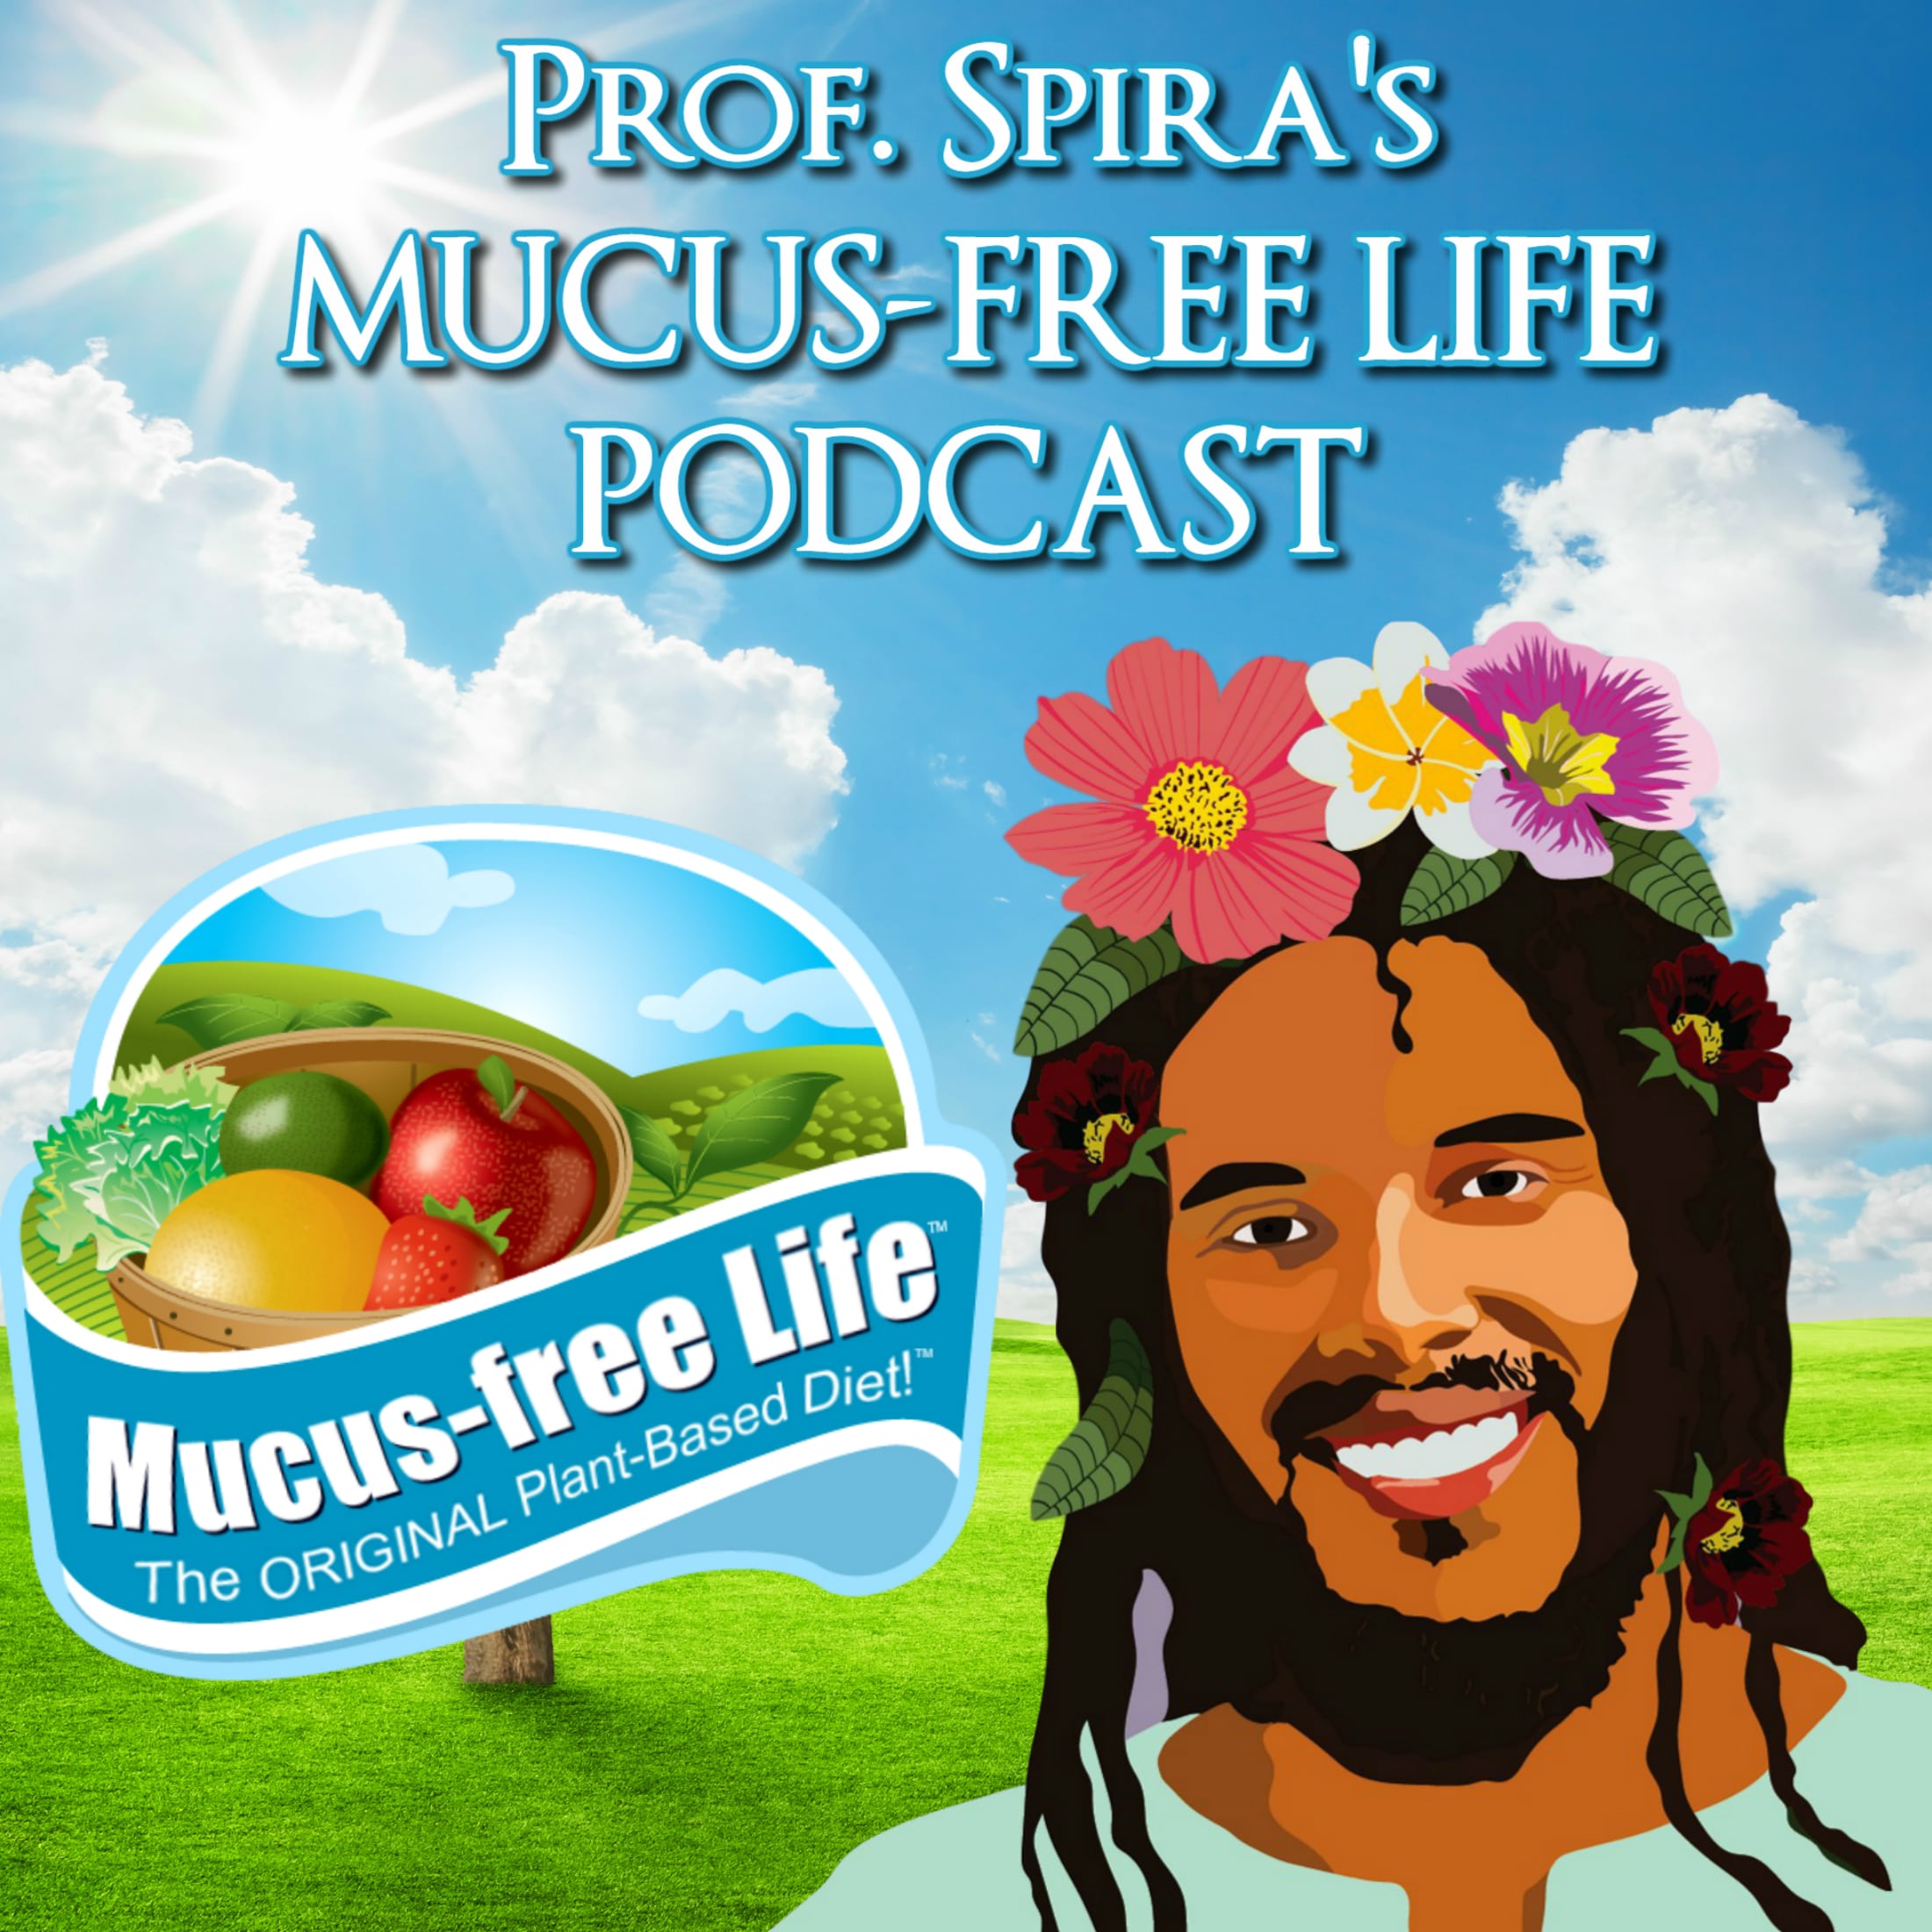 Ep. 20 - Forced Vaccine Prevention, Black Lives Matter Protests, Is Coalition Possible? - Prof. Spira's Mucus-free Life Podcast - Himalaya